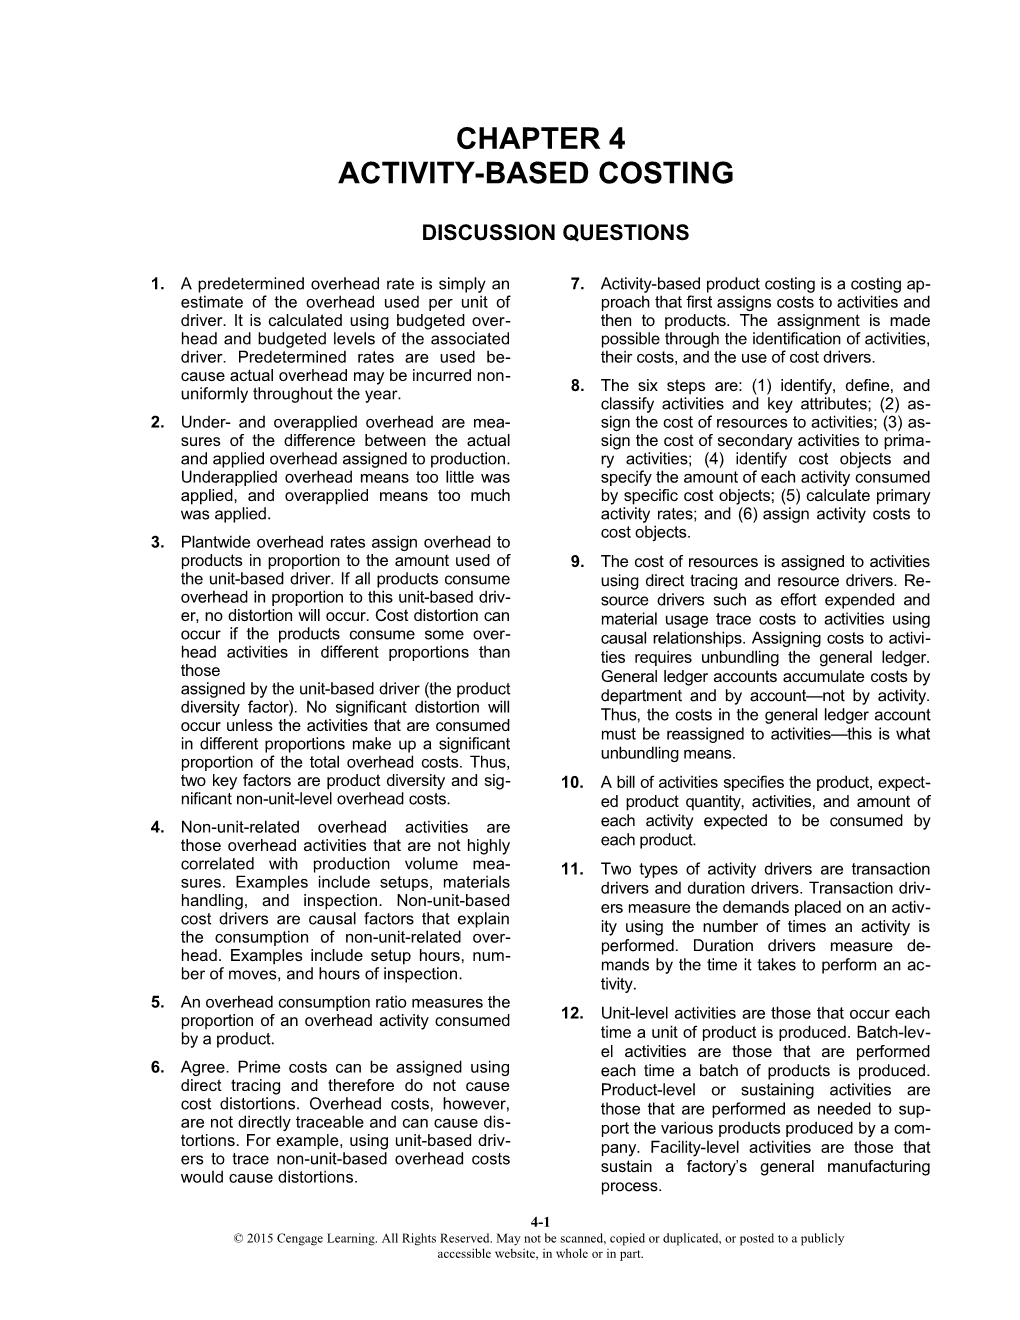 Chapter 12: Activity-Based Costing